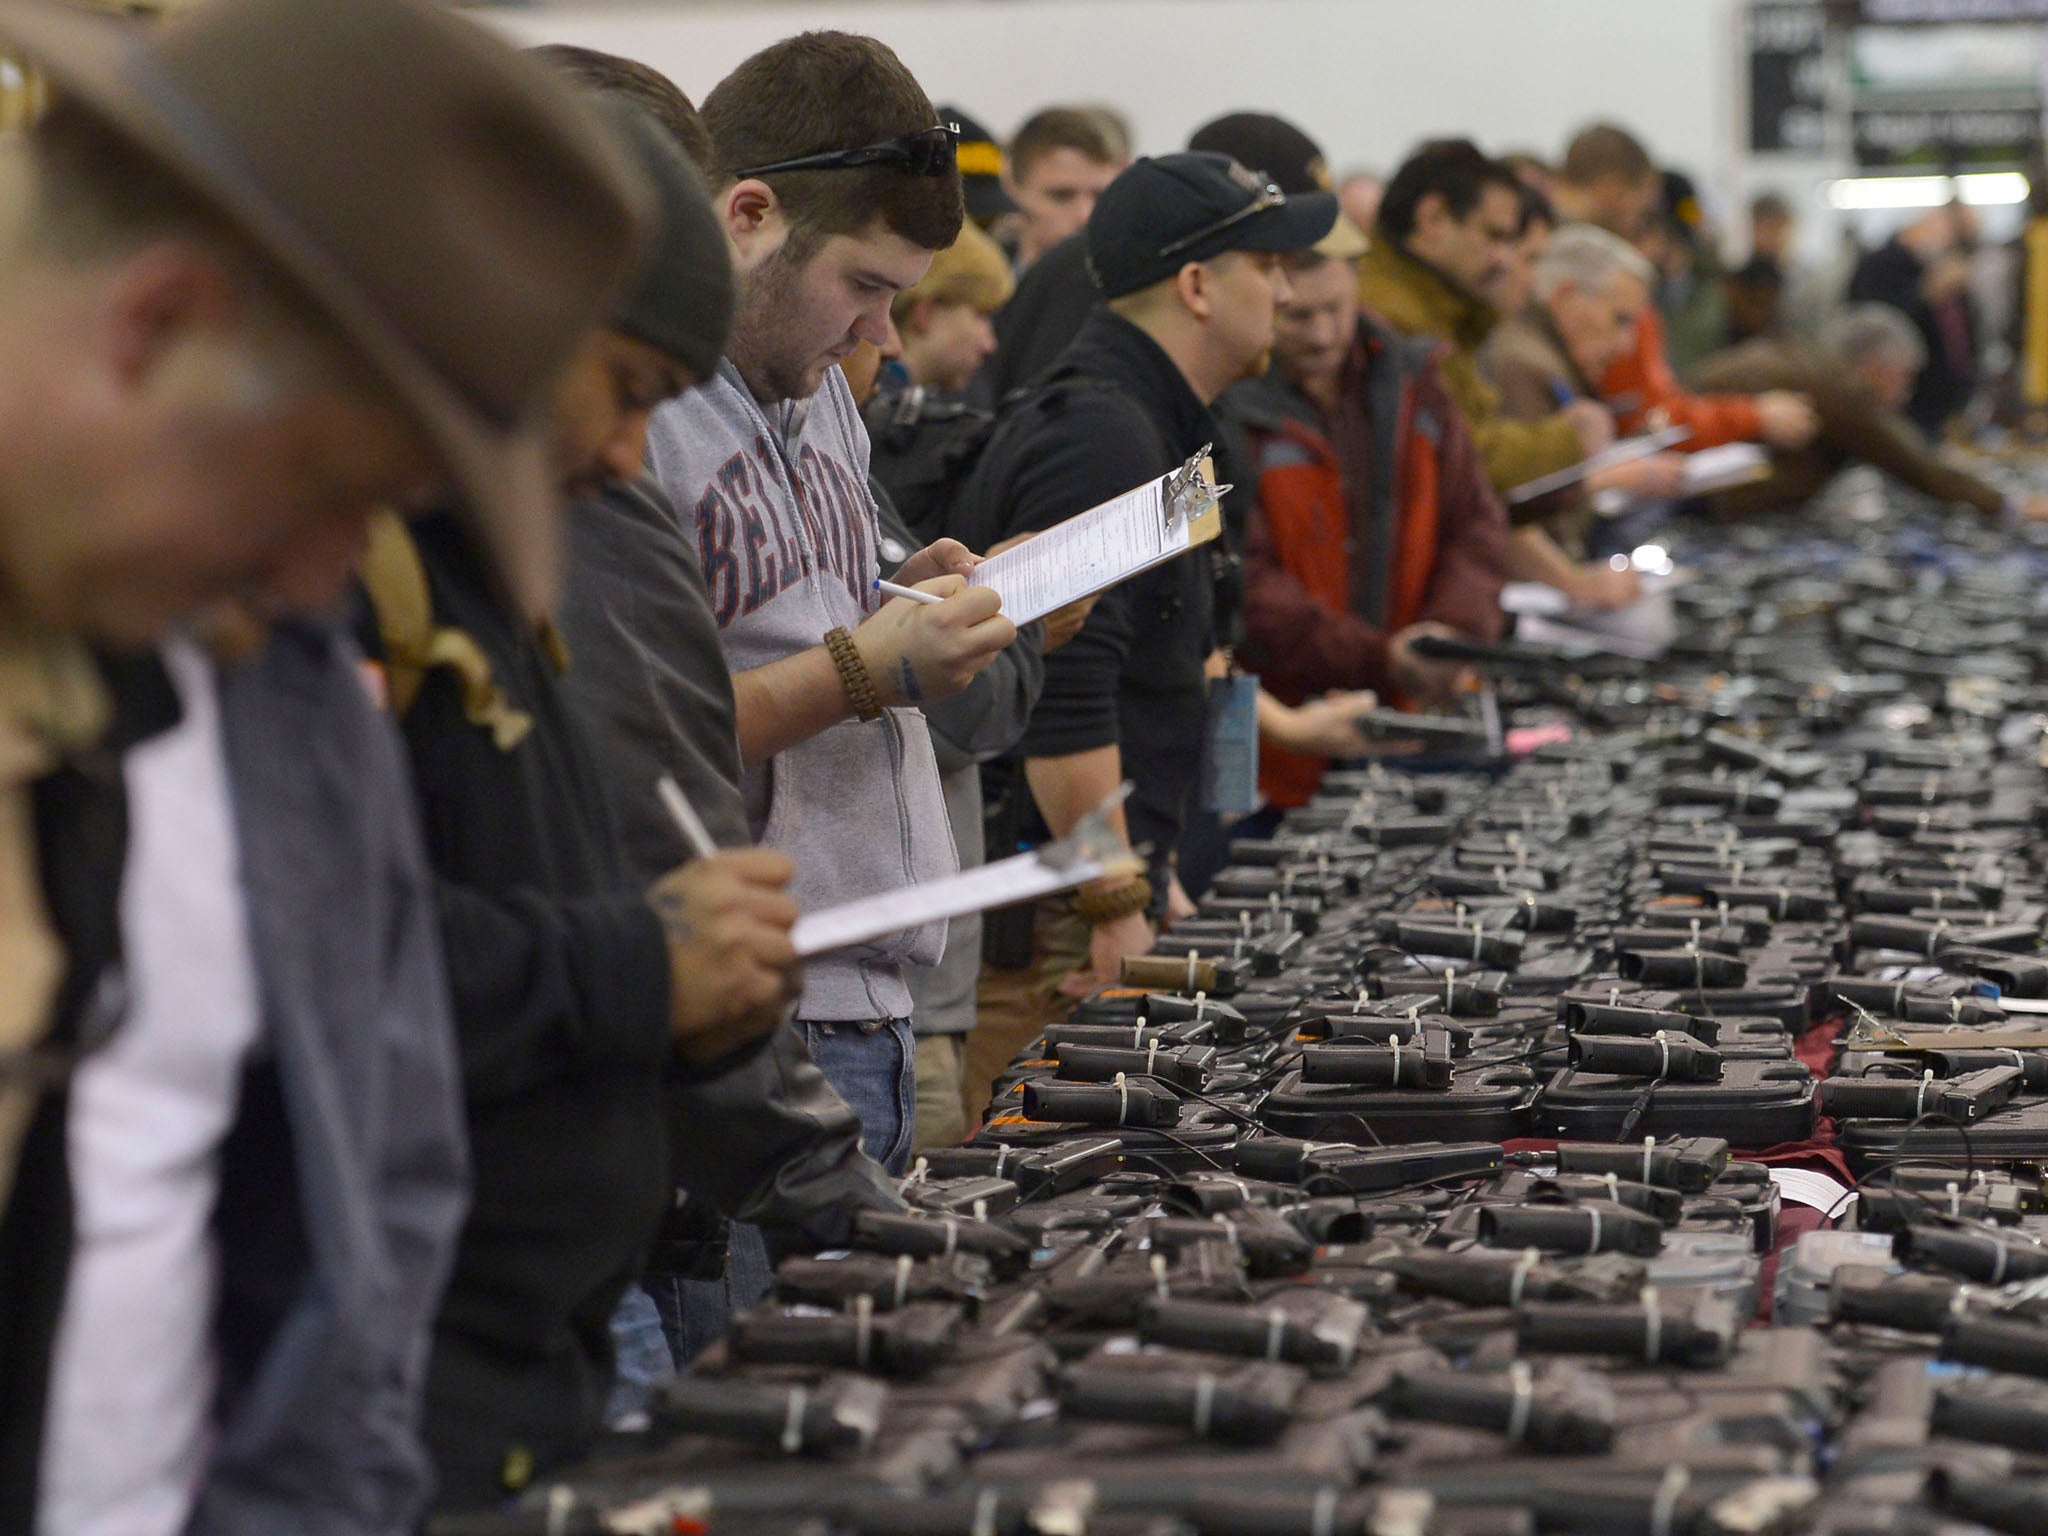 Gun enthusiasts fill out their background check paperwork while shopping for handguns at the Nation's Gun Show at the Dulles Expo Center in Chantilly, Virginia.